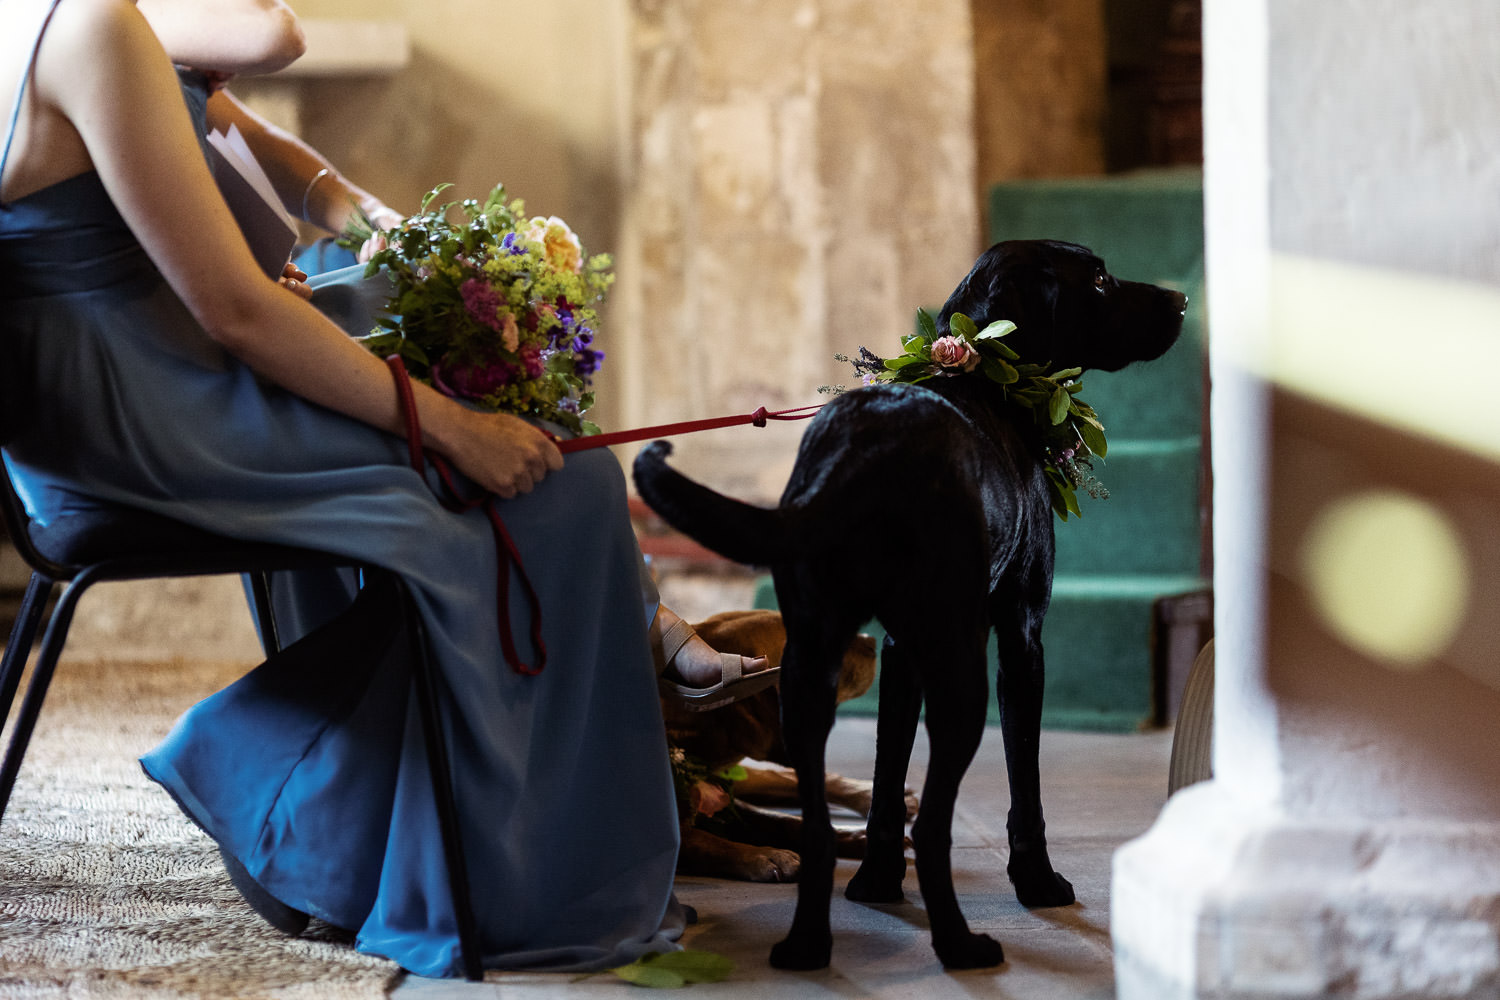 Bridesmaid holding a dog lead in a church. The black dog is watching the wedding.